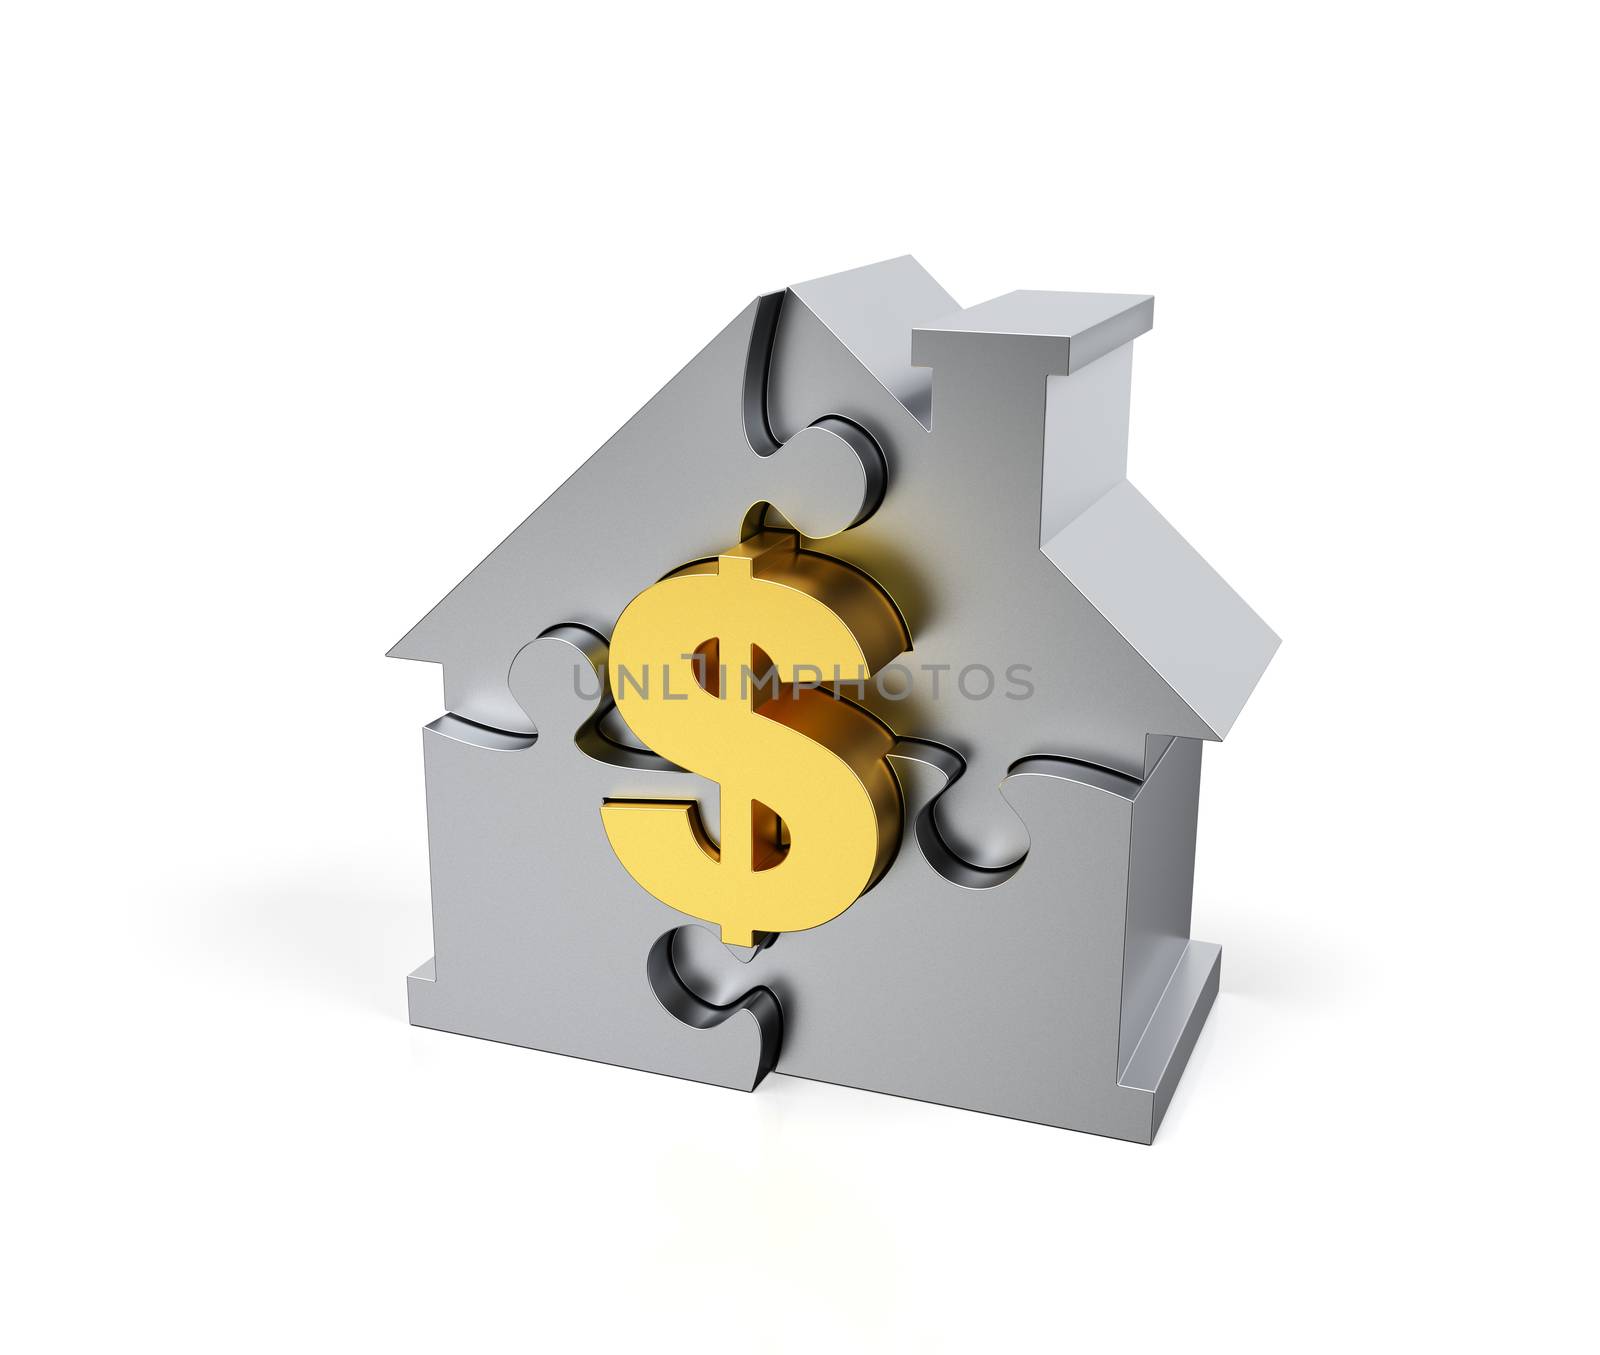 Steel Jigsaw Puzzle house with golden dollar sign by vkstudio